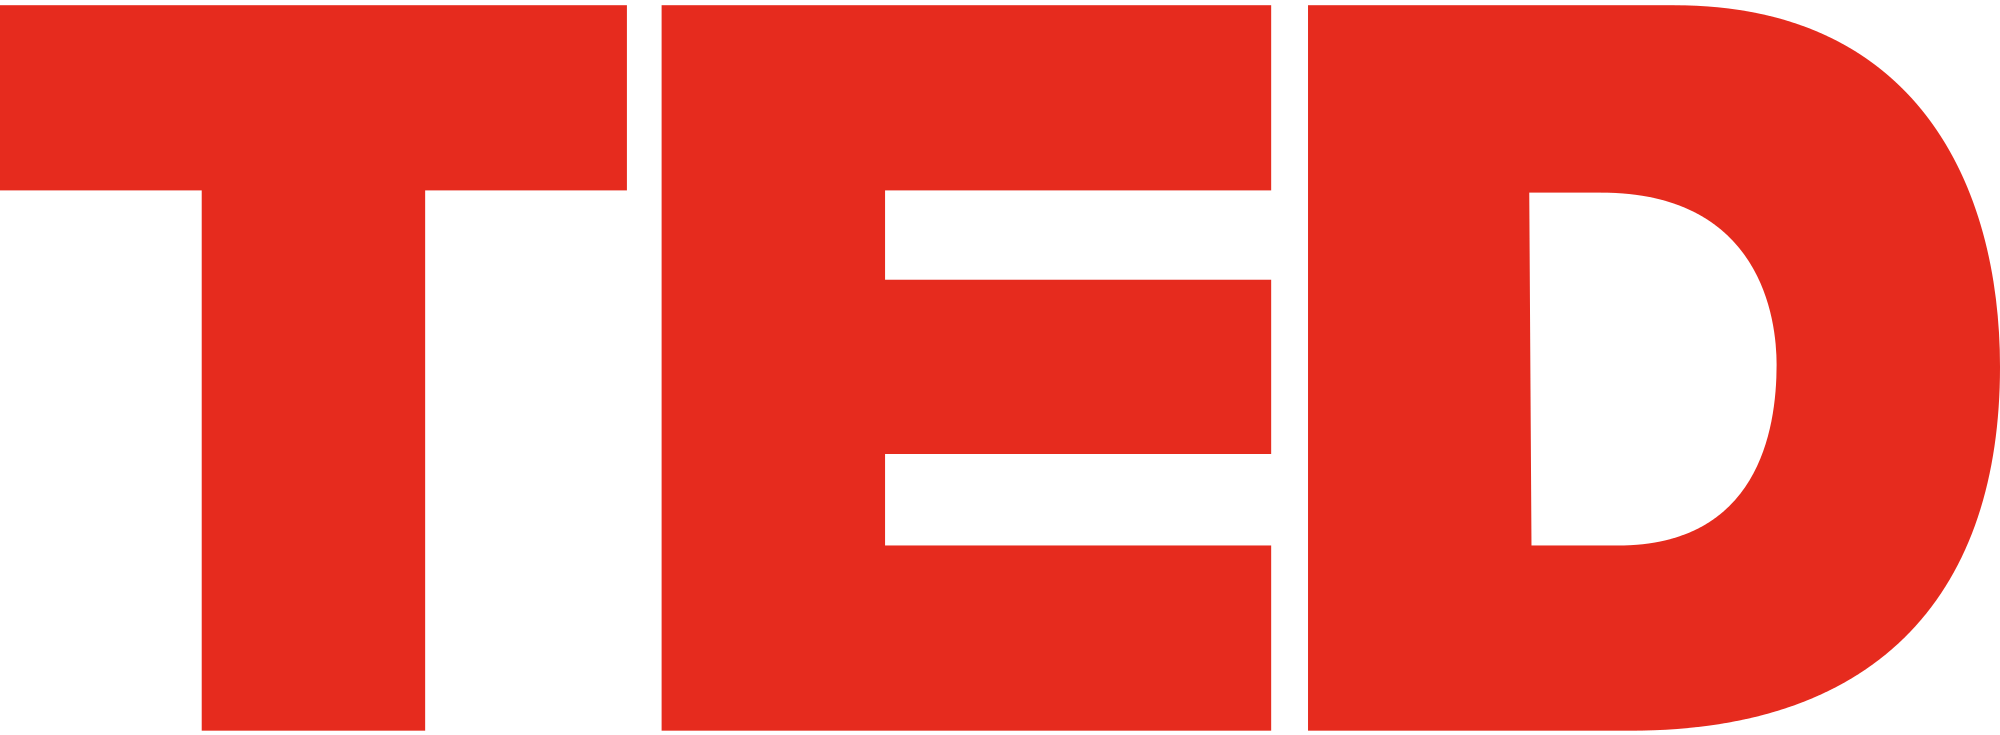 Three Letter Logo - File:TED three letter logo.svg - Wikimedia Commons